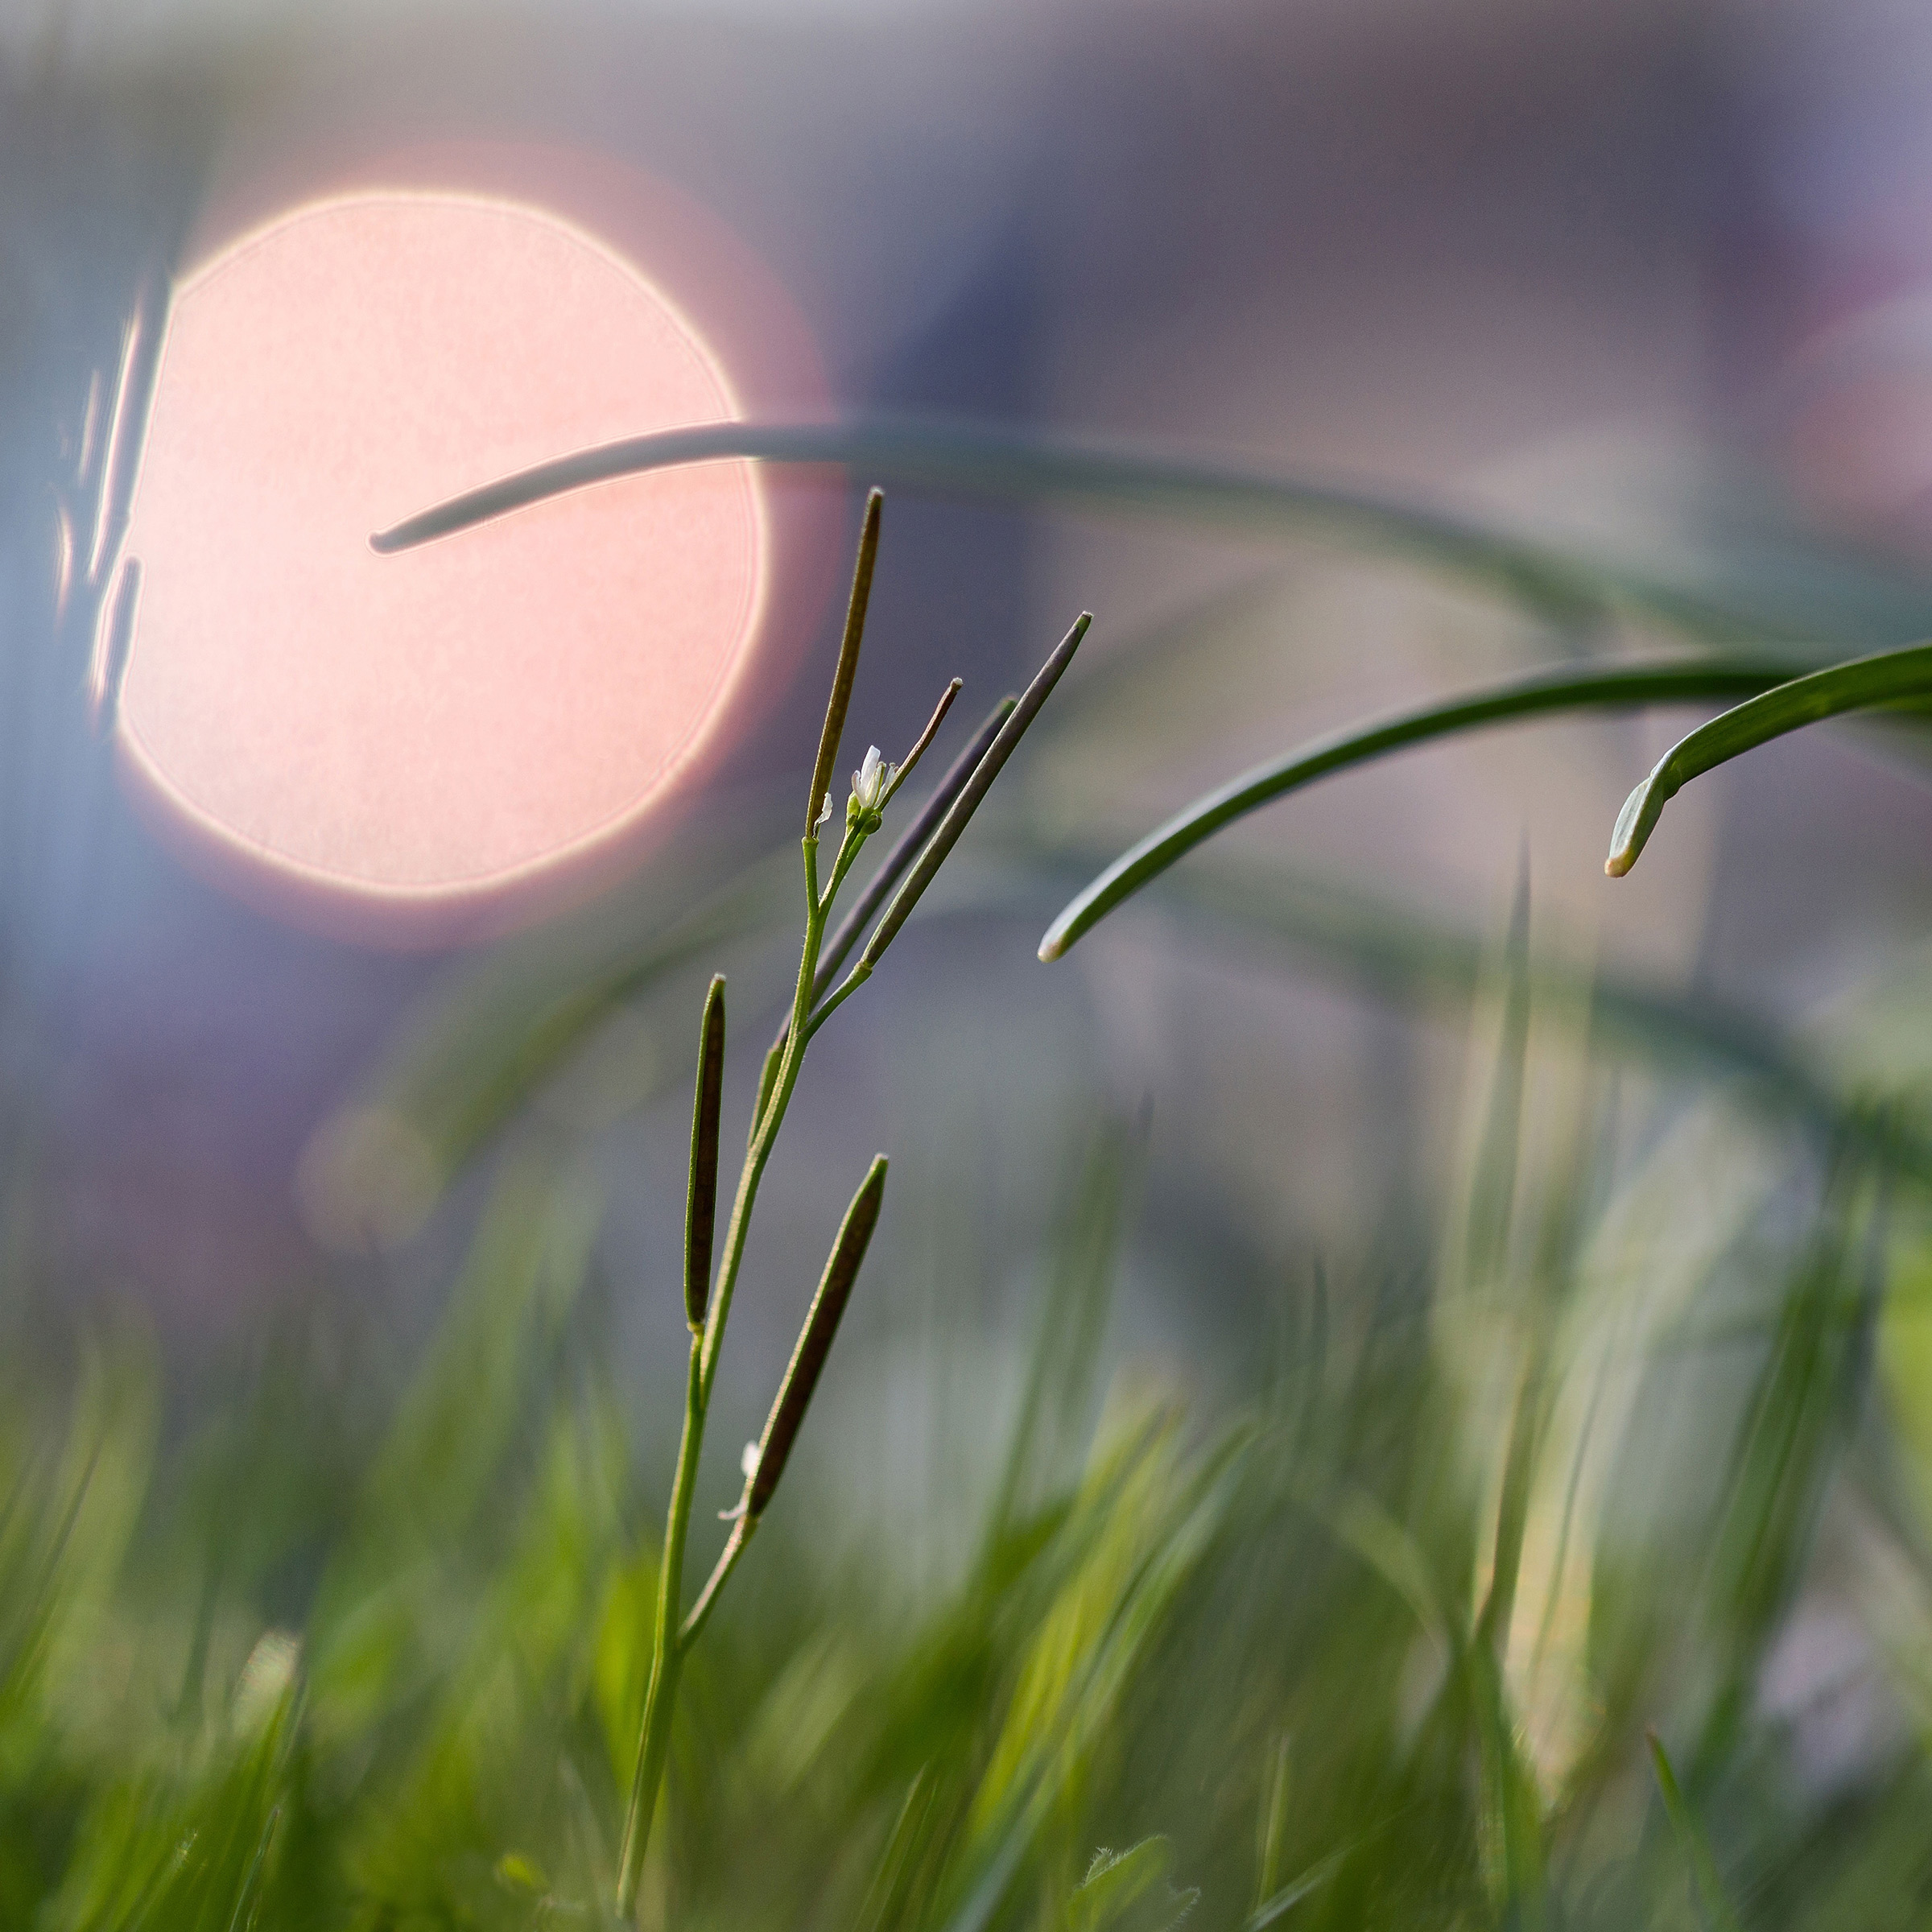 Close-up of a budding Cardamine pratensis flower amidst swaying grass blades under a red circular sun and purple evening sky.